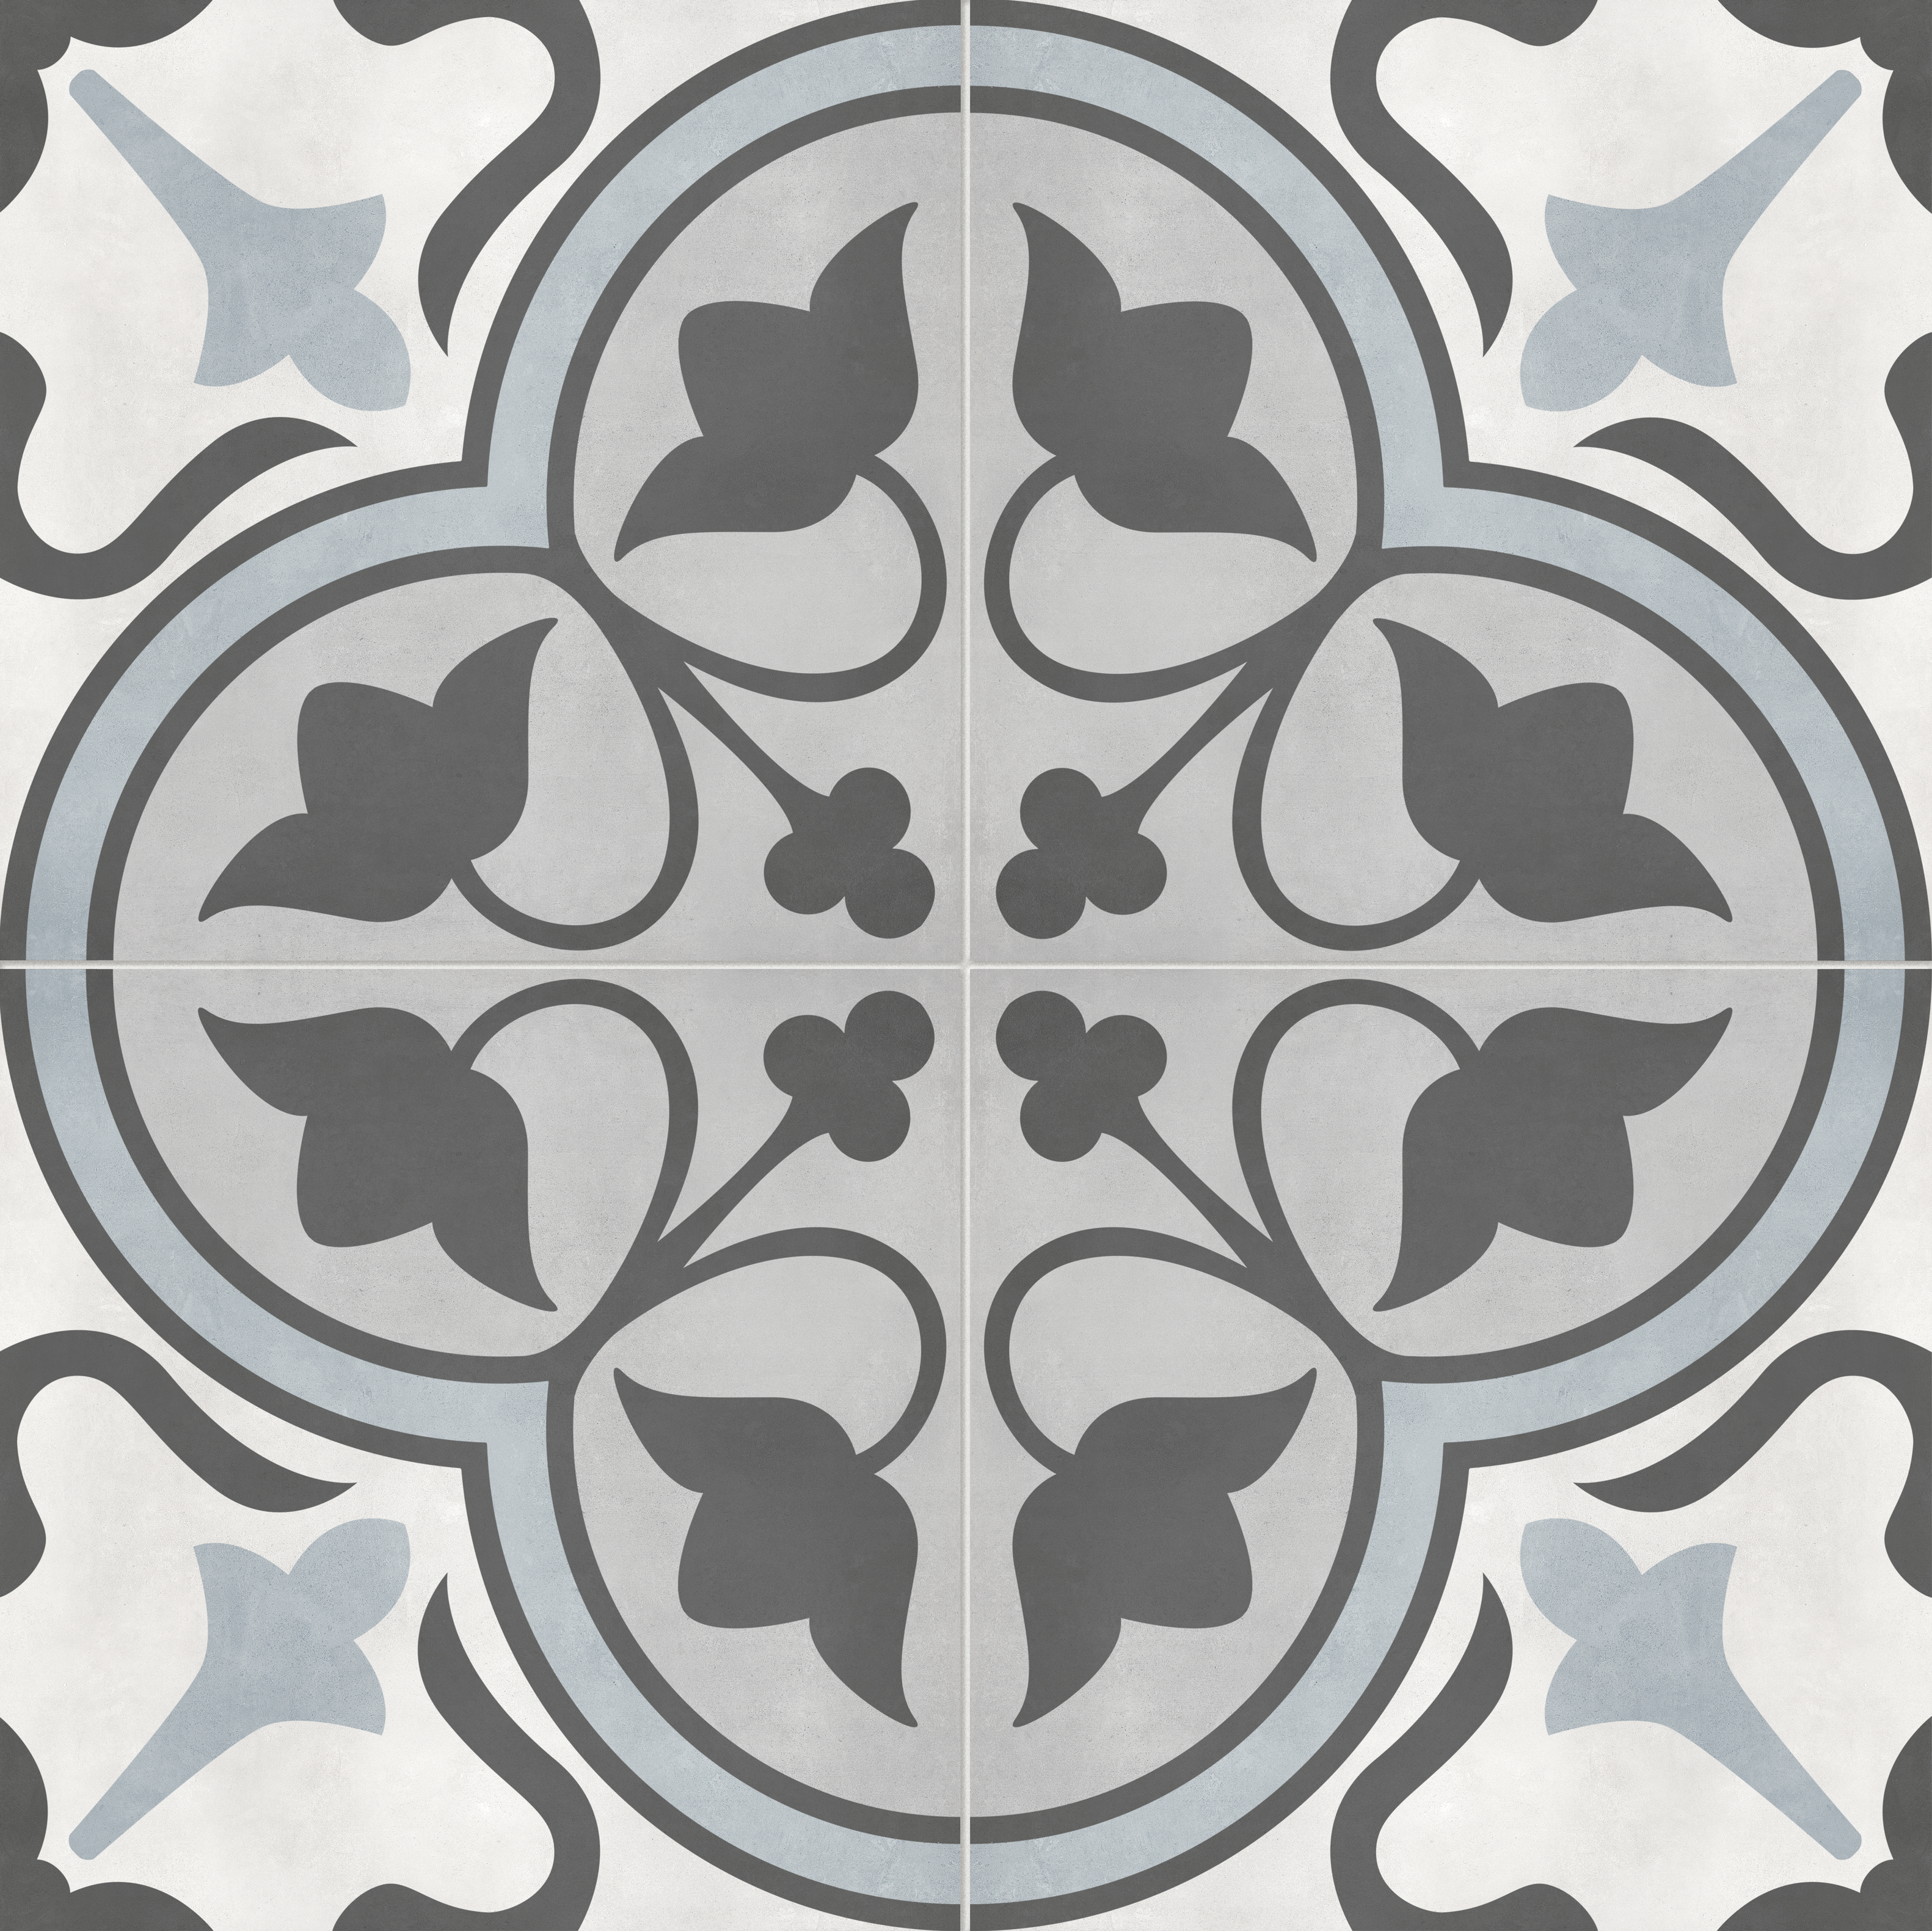 tide print pattern glazed porcelain deco tile print blend from form anatolia collection distributed by surface group international matte finish pressed edge 8x8 square shape